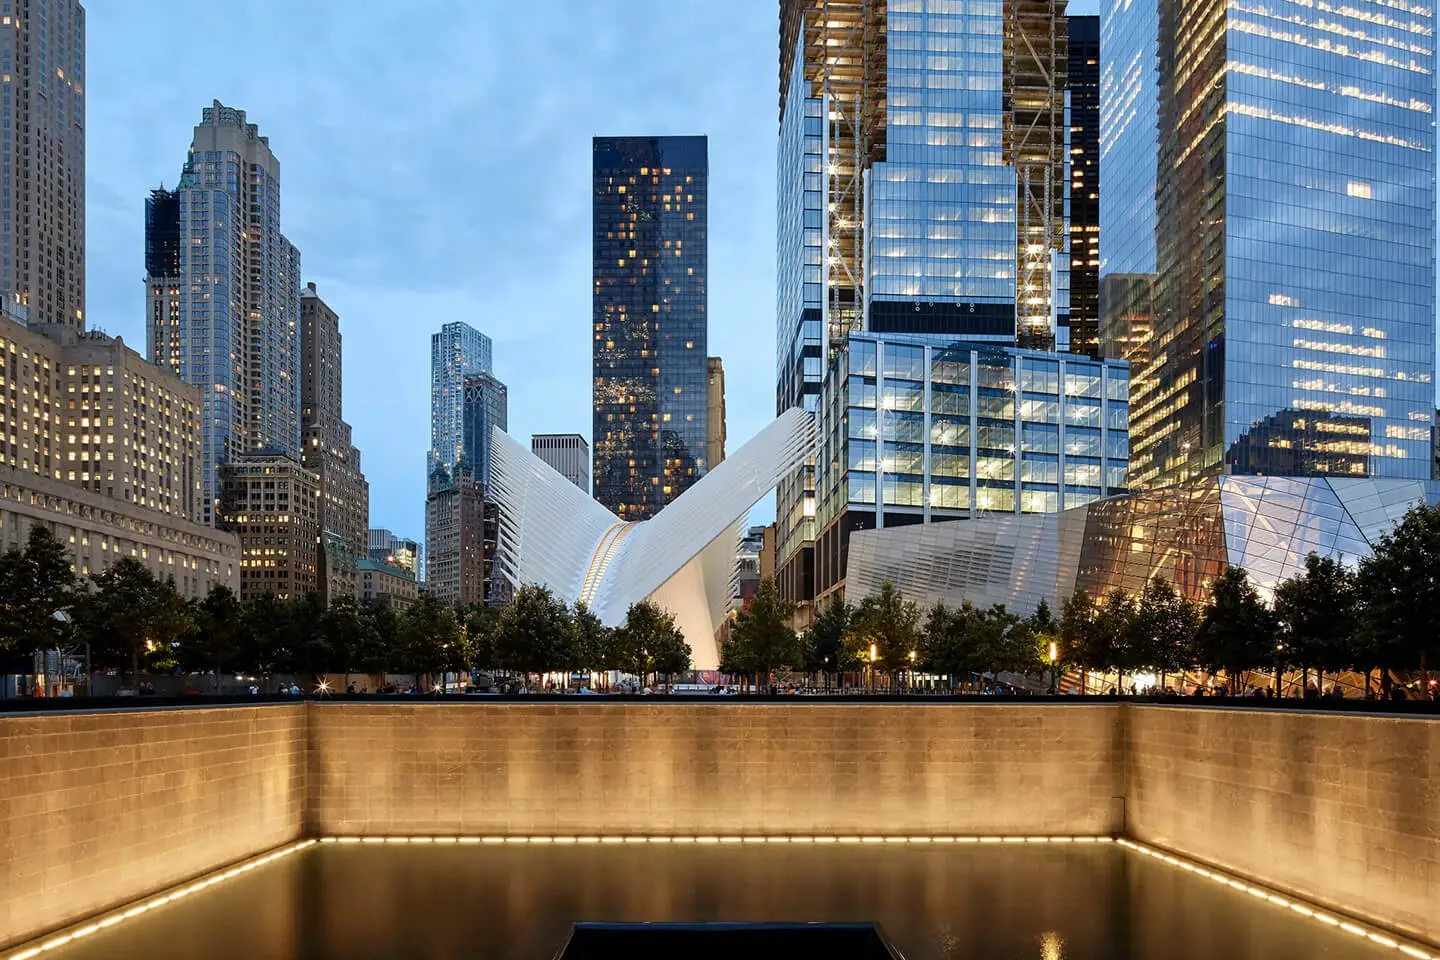 Evening view of an urban plaza with the oculus structure at the World Trade Center amidst surrounding skyscrapers in Manhattan, New York City.